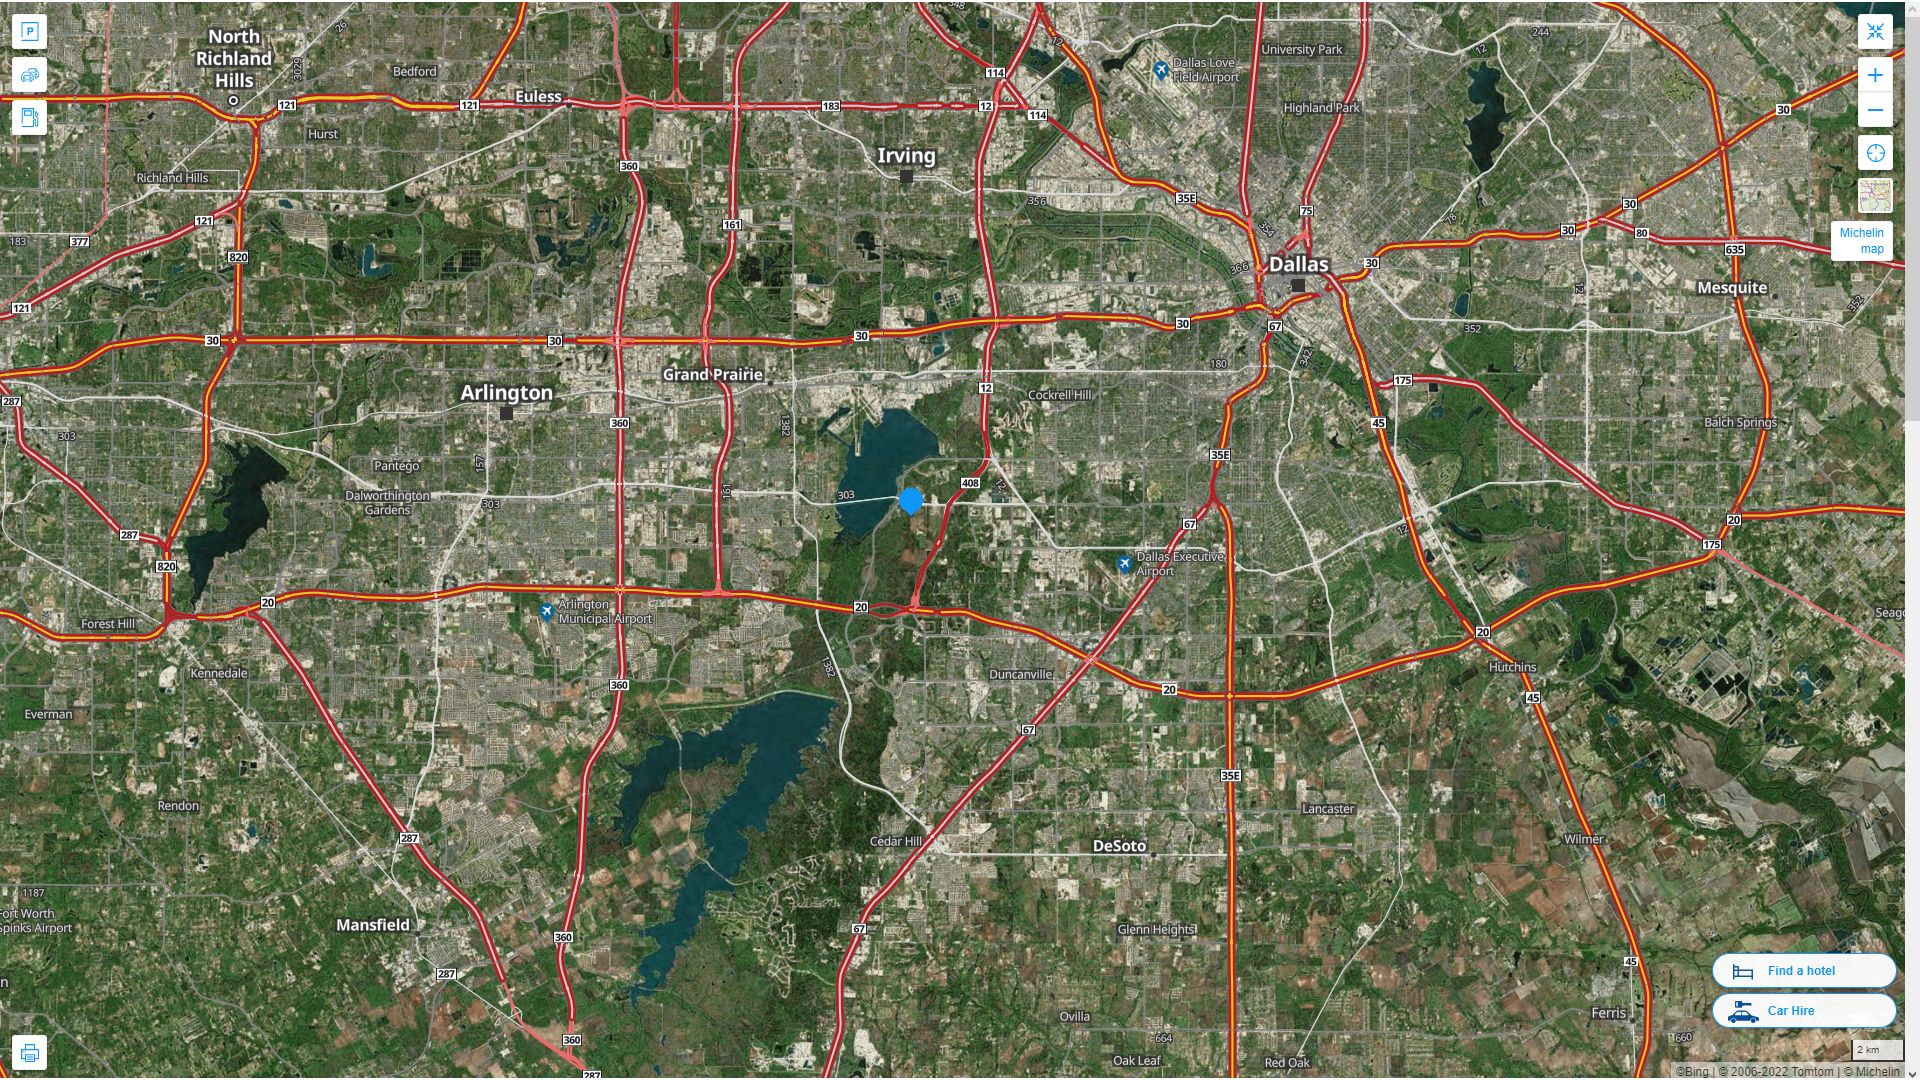 Grand Prairie Texas Highway and Road Map with Satellite View